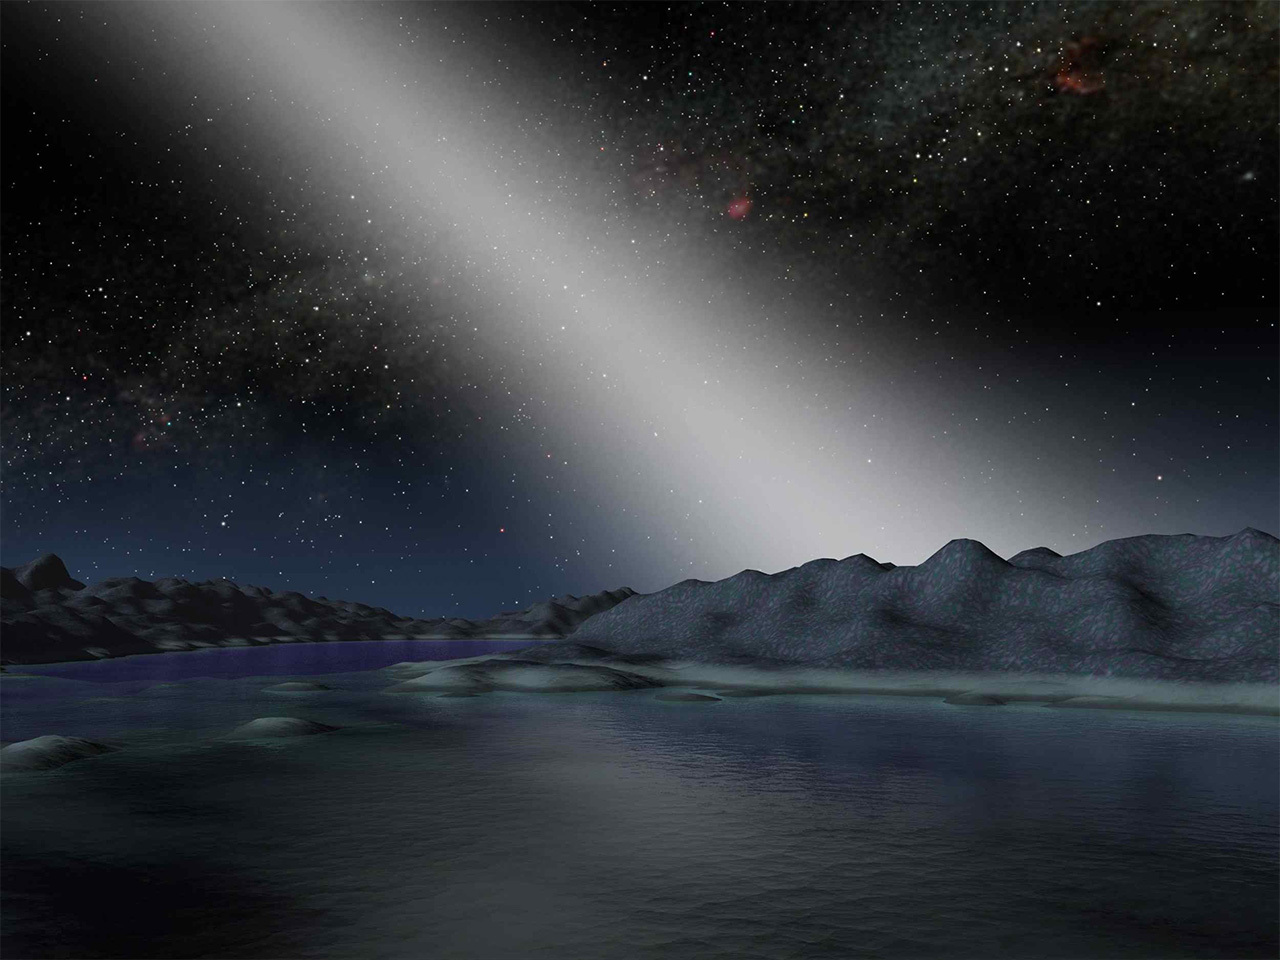 Illustration from a planet's surface of the night sky.